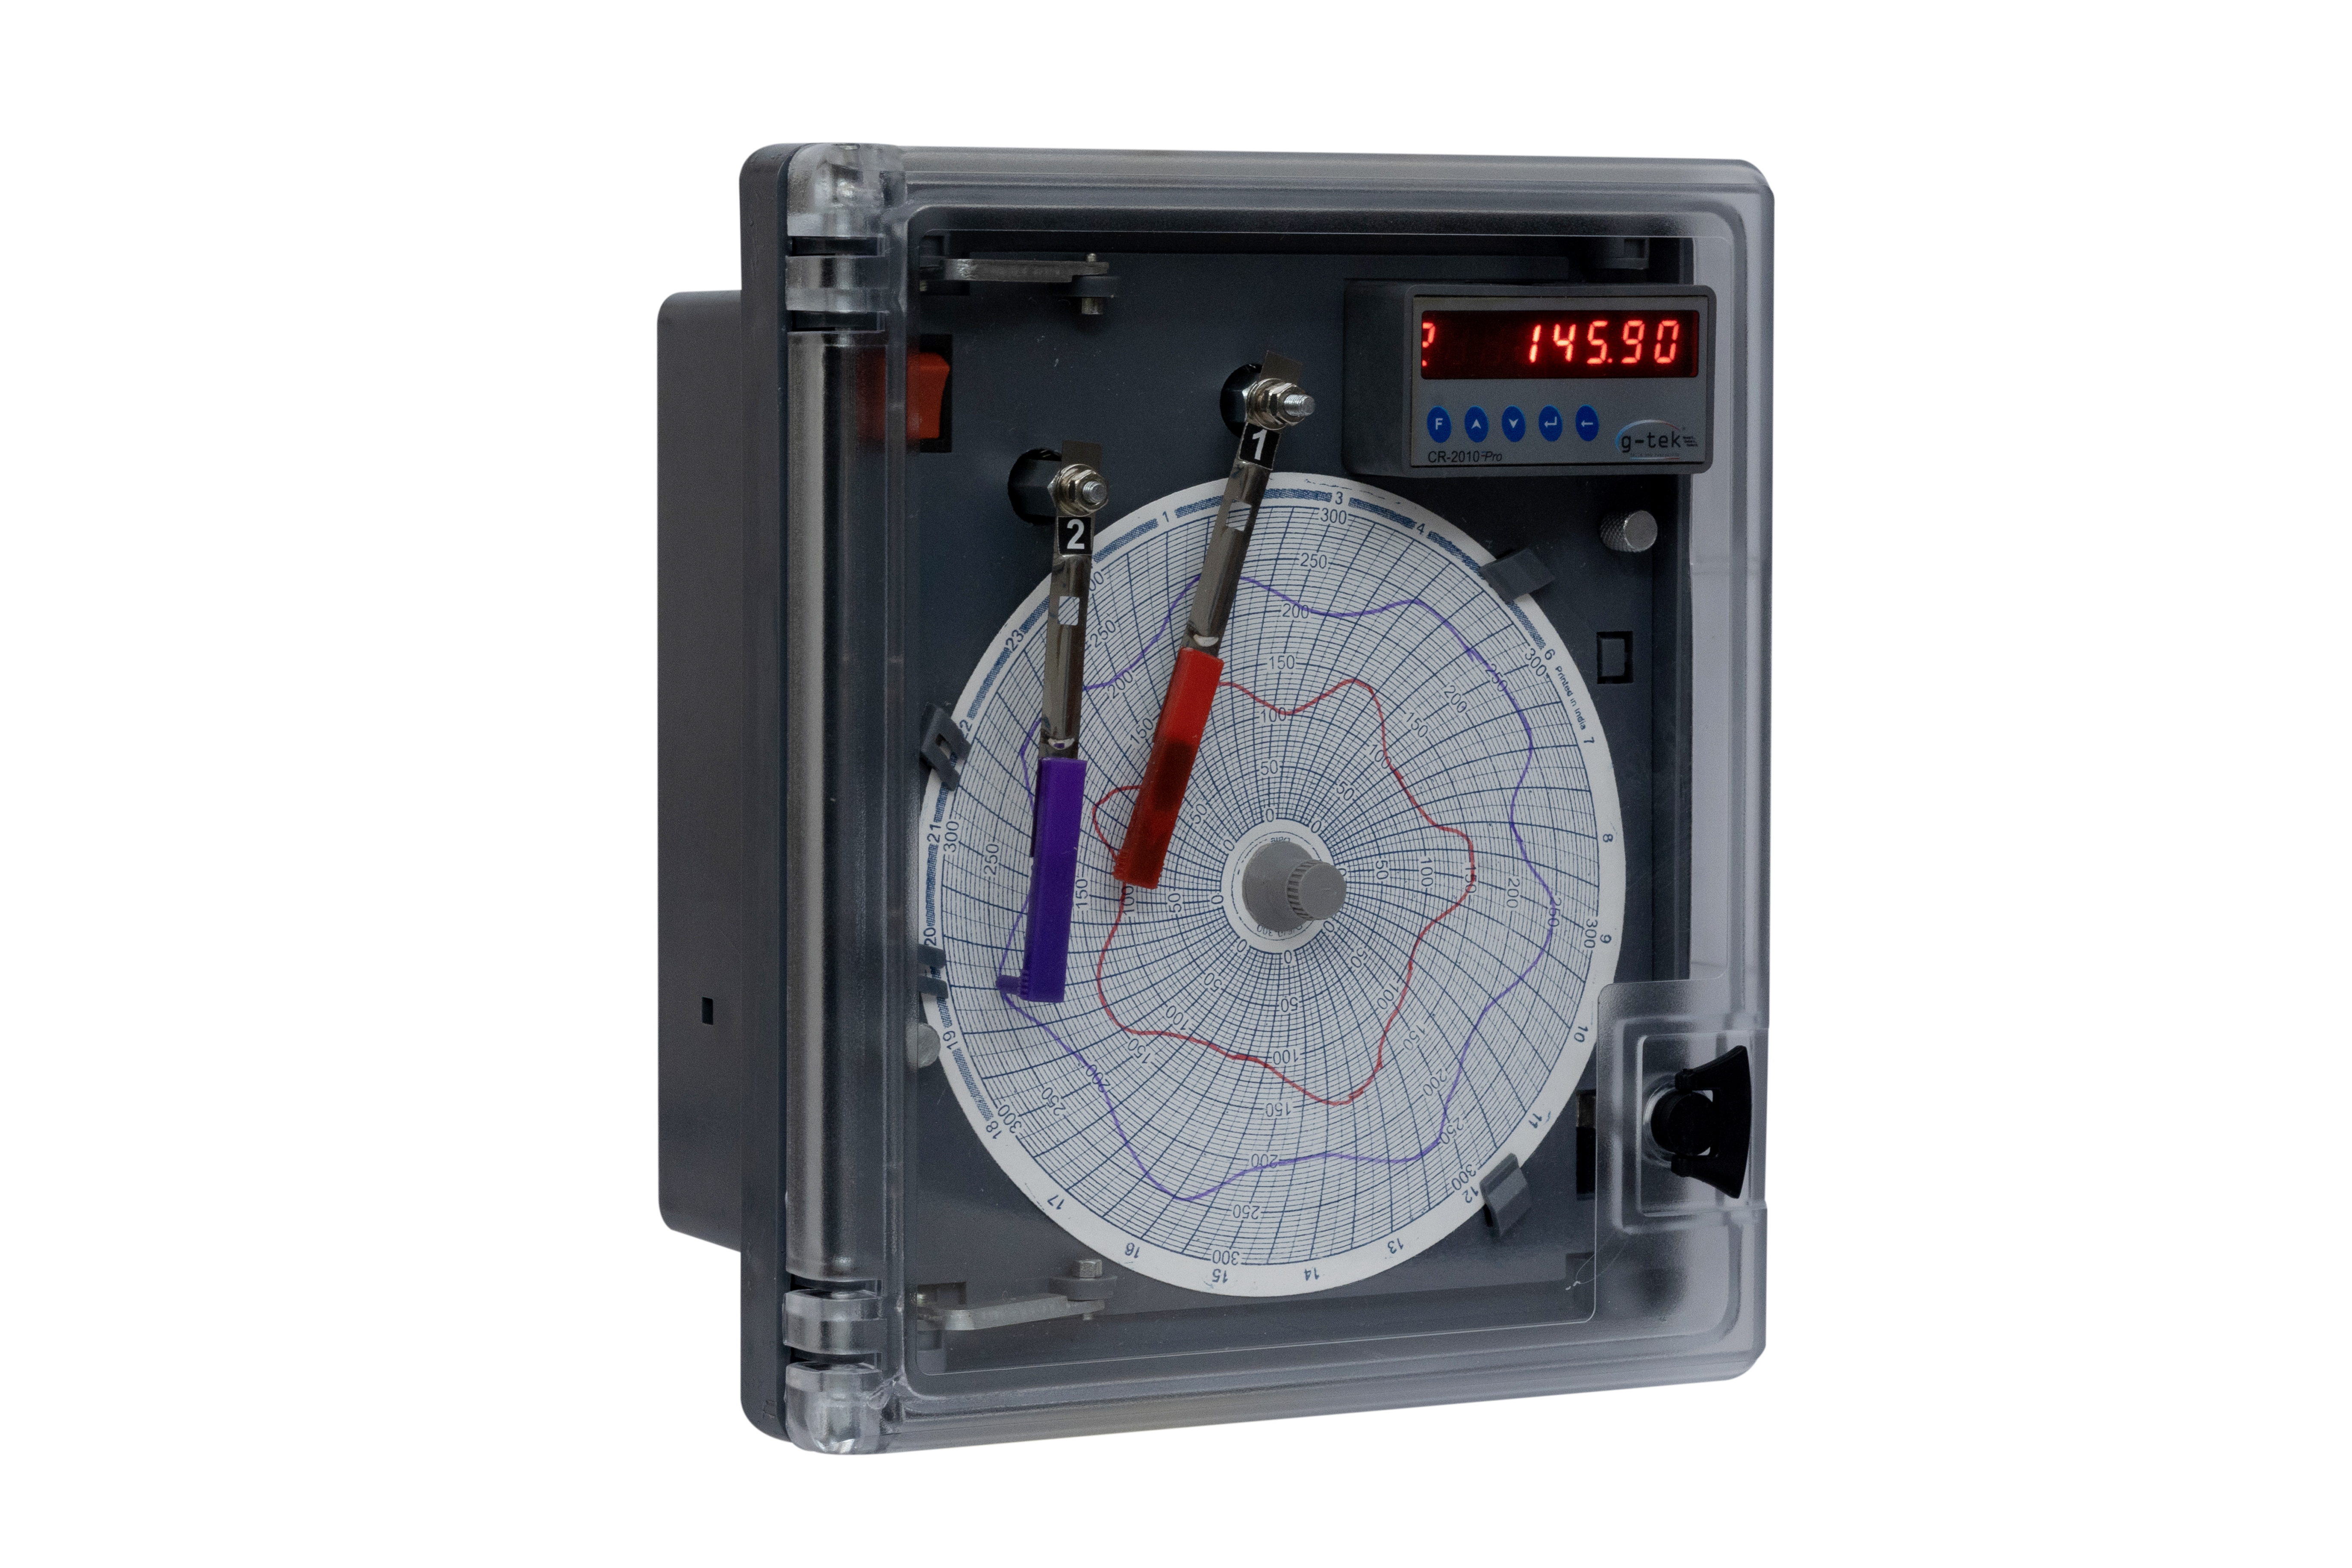 6 Inch 2 Pen Circular Chart Recorder With Display